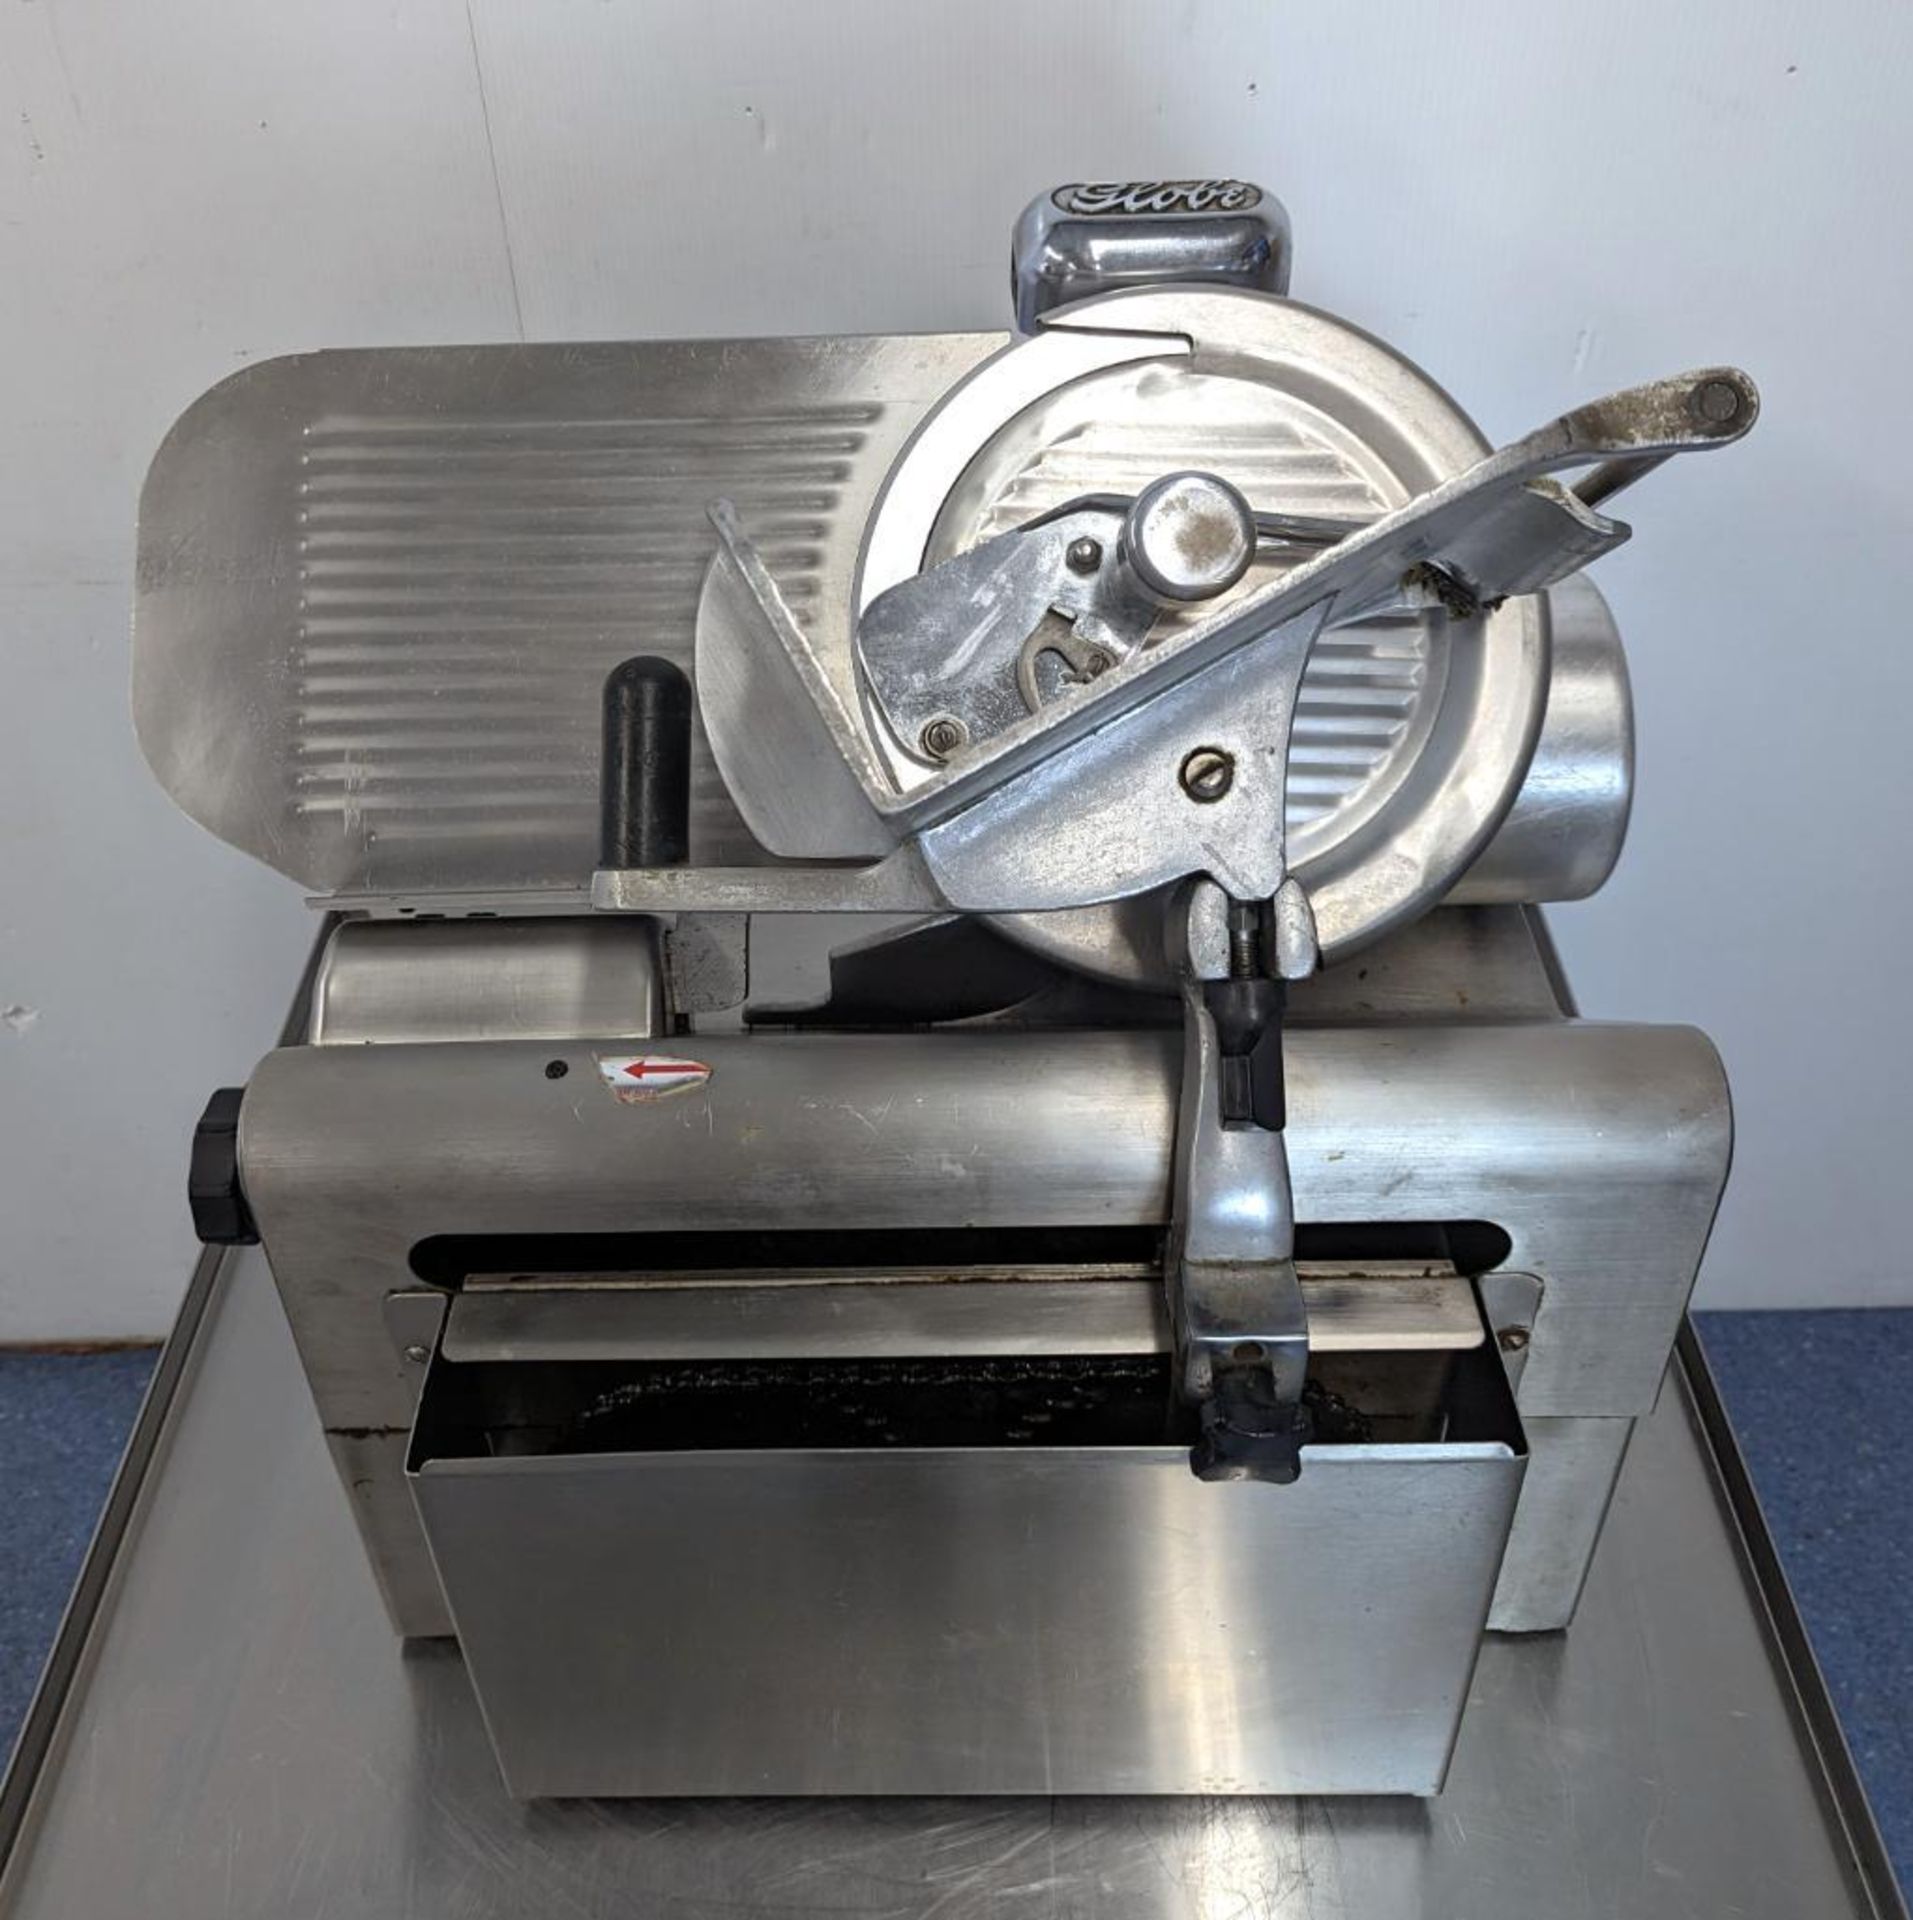 GLOBE 775 12" AUTOMATIC MEAT SLICER WITH BLADE SHARPENER - Image 13 of 14